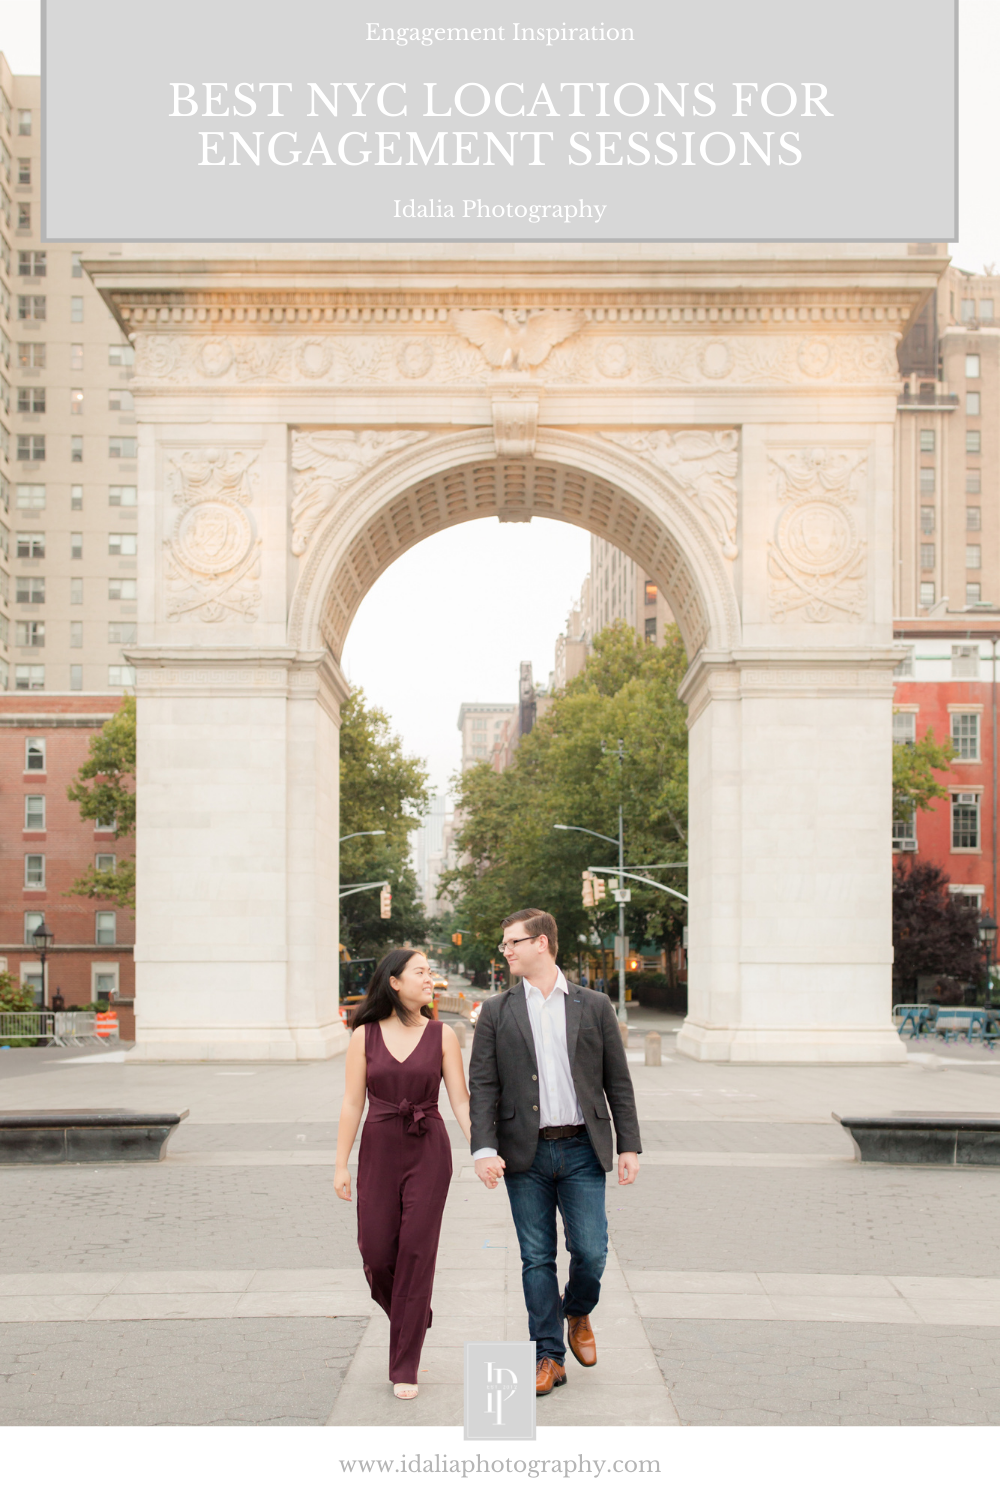 Best NYC locations for engagement sessions